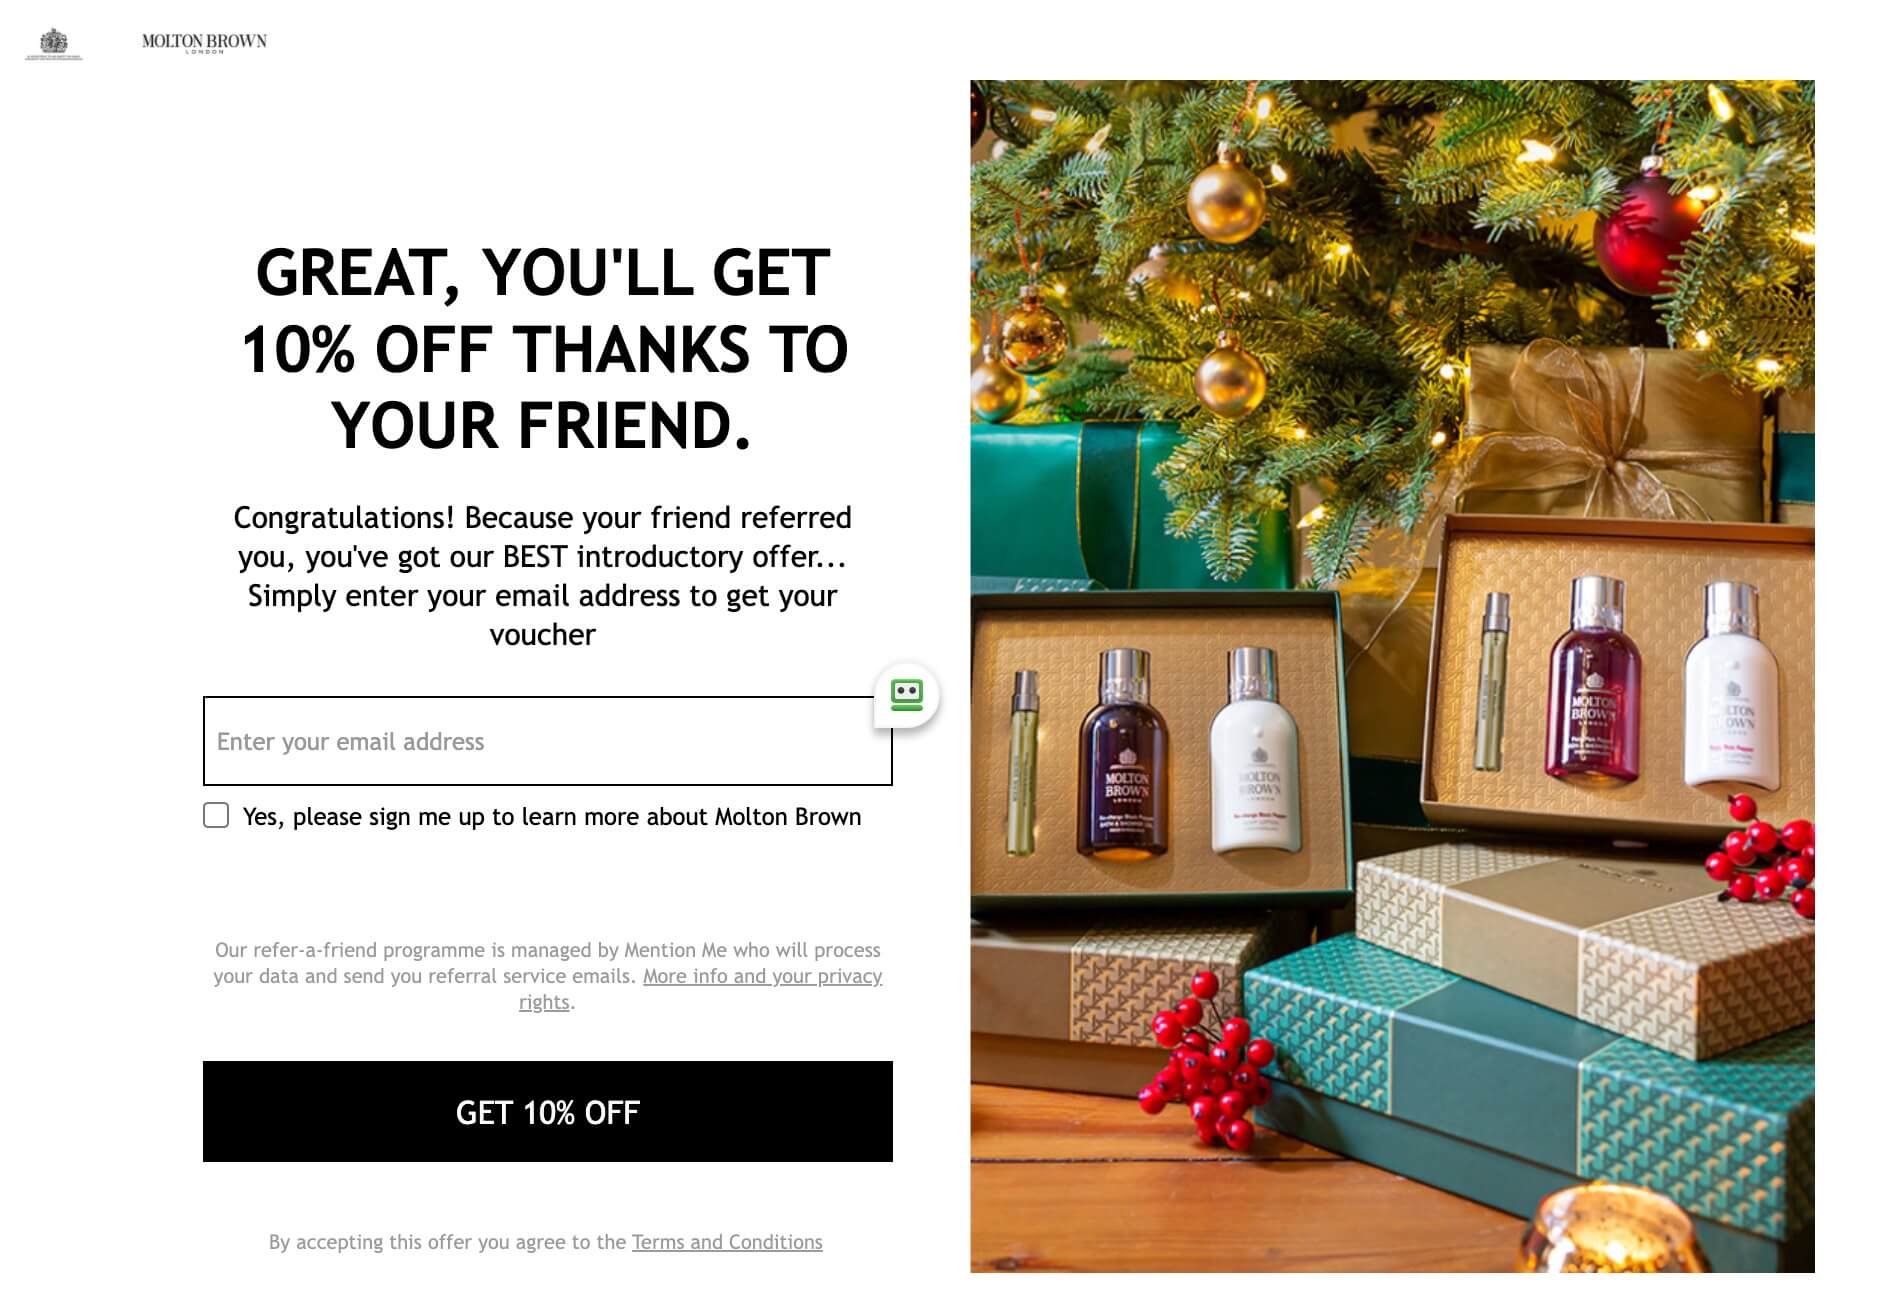 Molton Brown promo code, 10 off with this referral code + 9 cashback